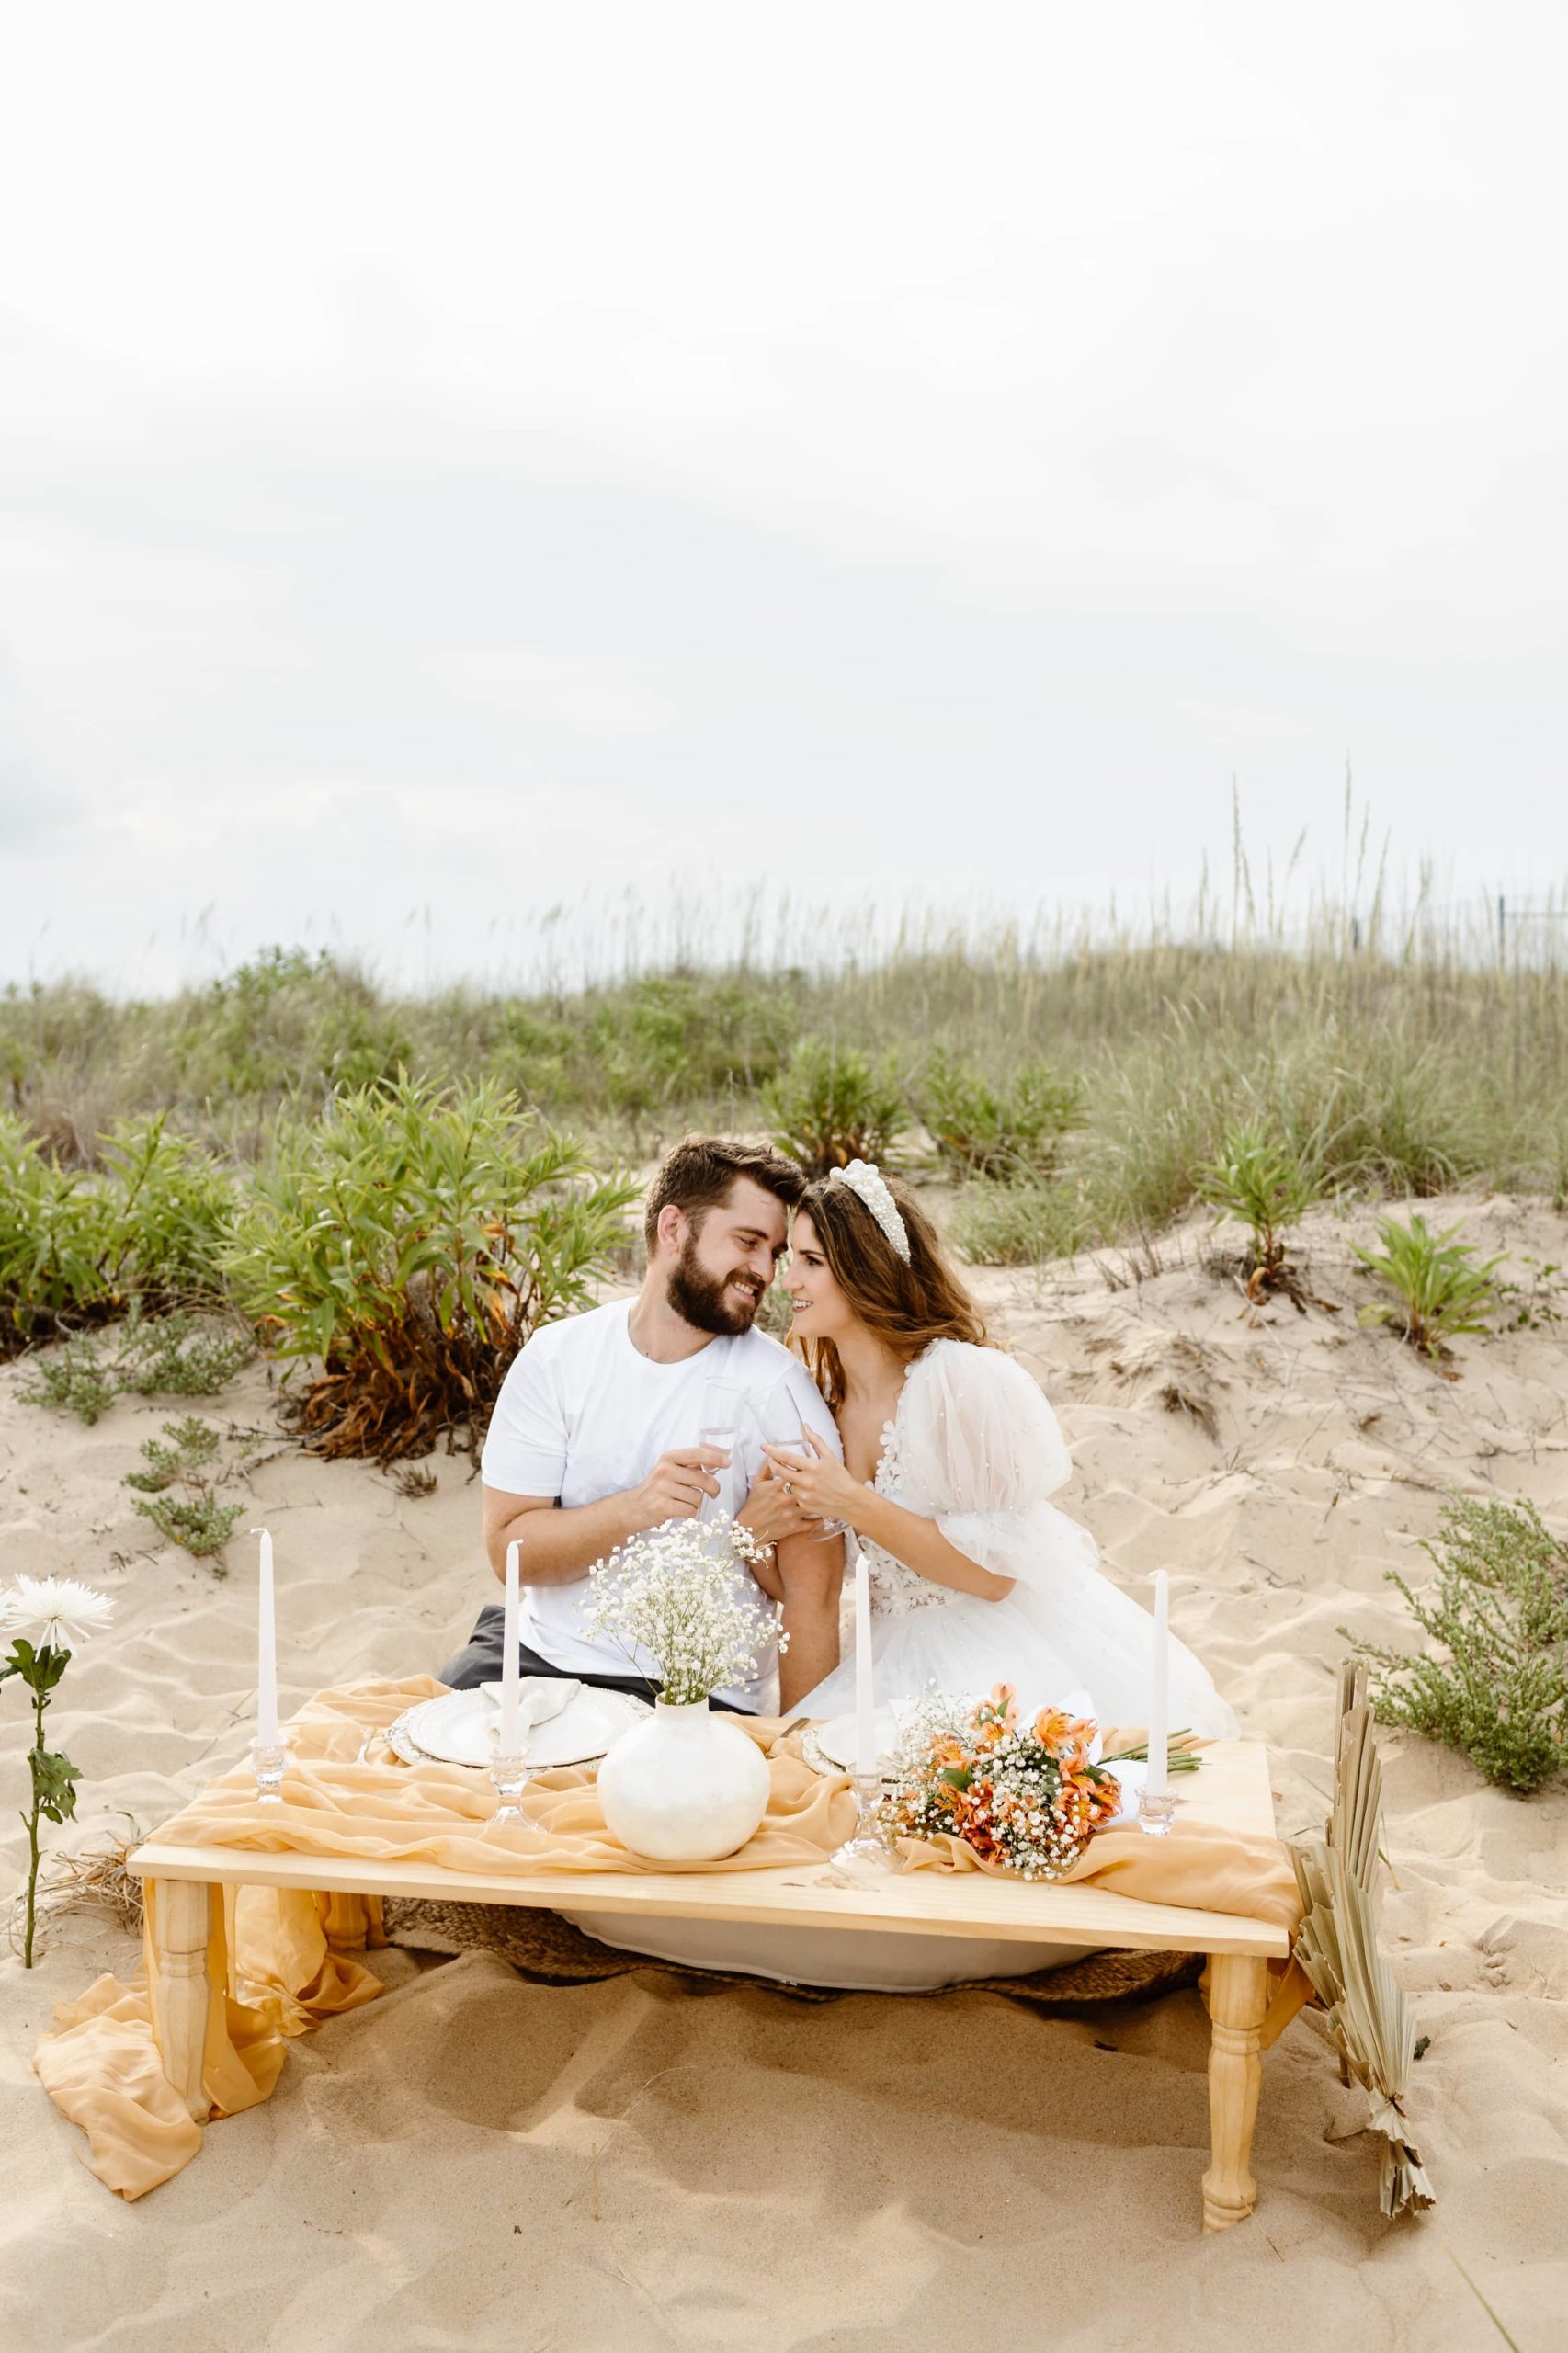 Bride and groom kneeling together on the beach at Bohemian luxury picnic on in Virginia Beach in a short wedding dress while cheering champagne glasses.